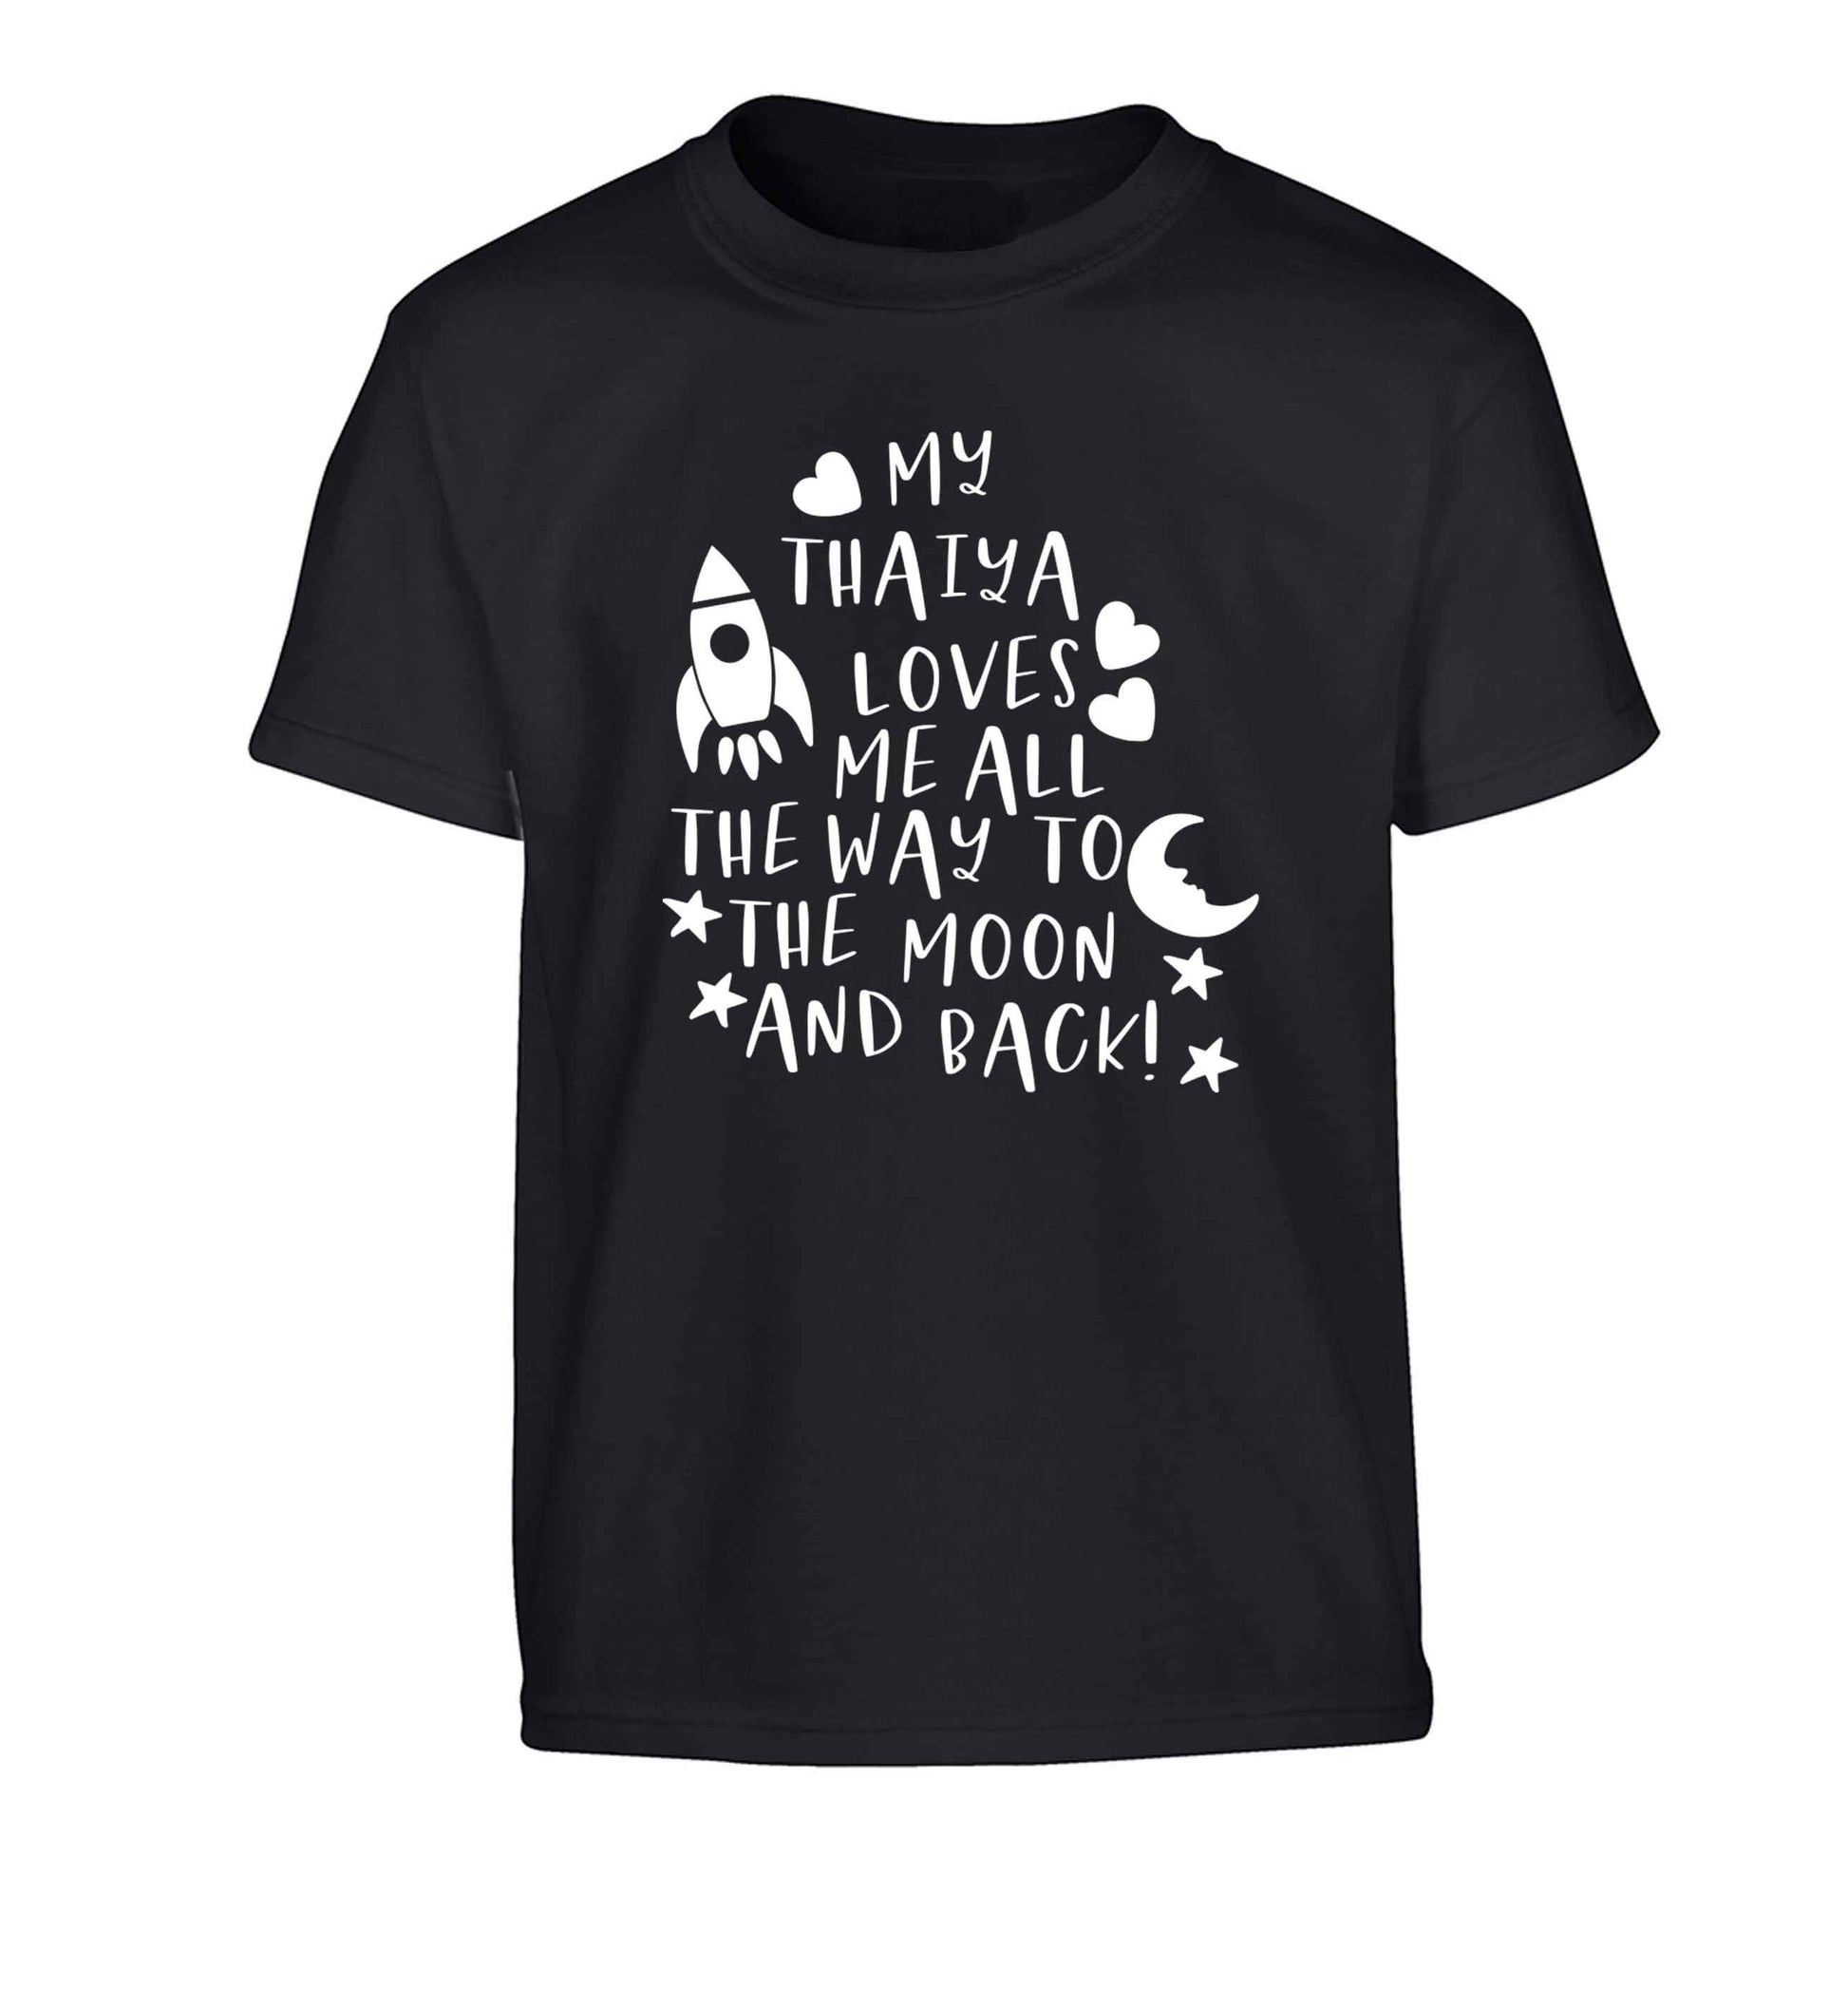 My thaiya loves me all the way to the moon and back Children's black Tshirt 12-13 Years